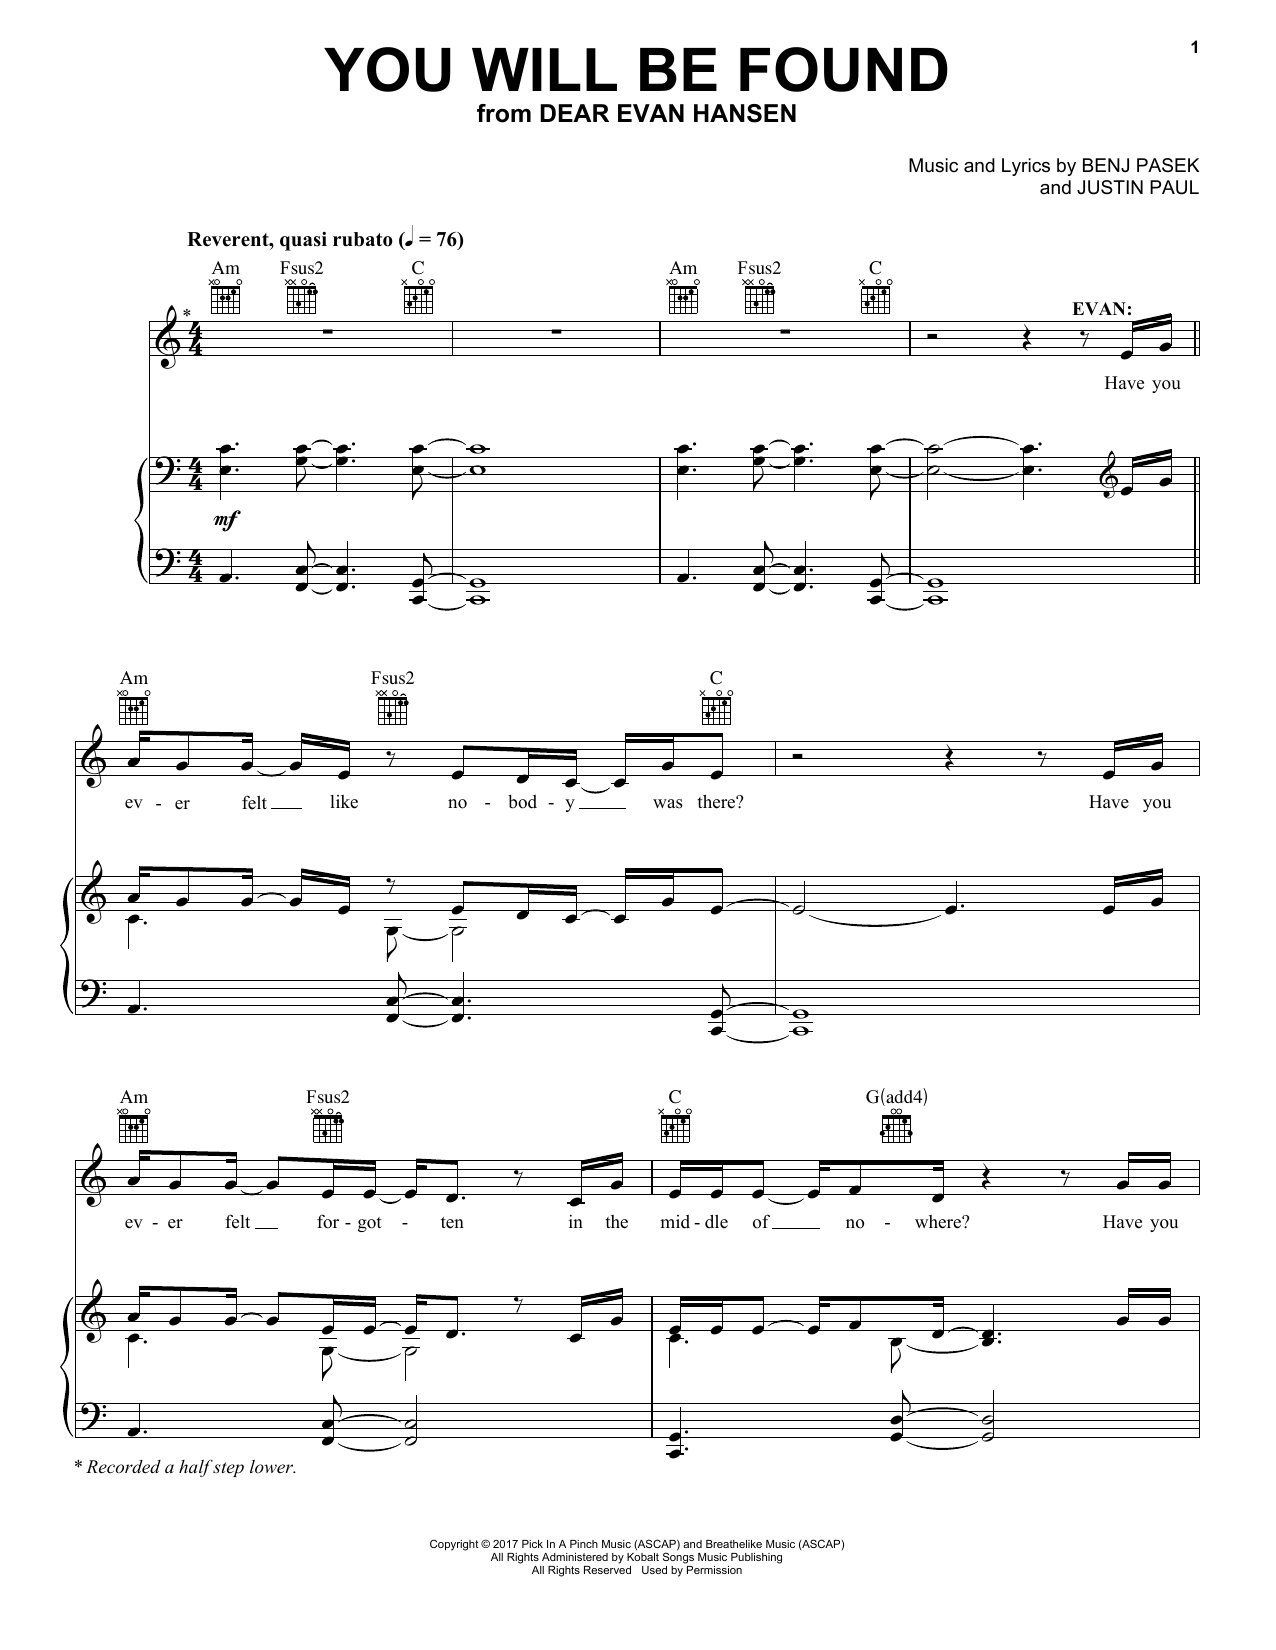 Download Pasek & Paul You Will Be Found (from Dear Evan Hanse Sheet Music